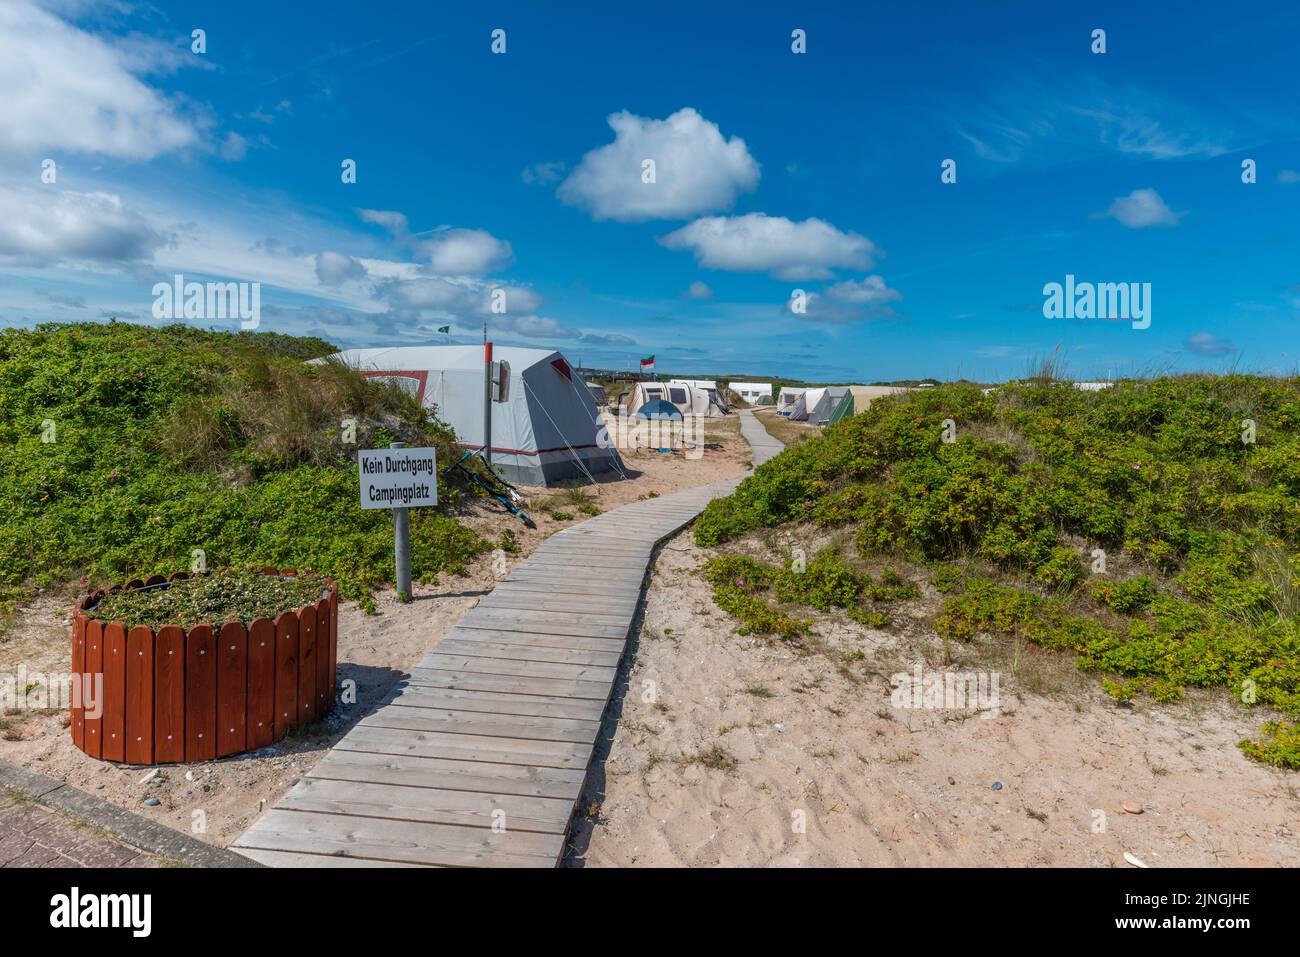 Camping site on the high seas island The Dune, part of Heligoland, district Pinneberg, Schleswig-Holstein, Northern Germany Stock Photo